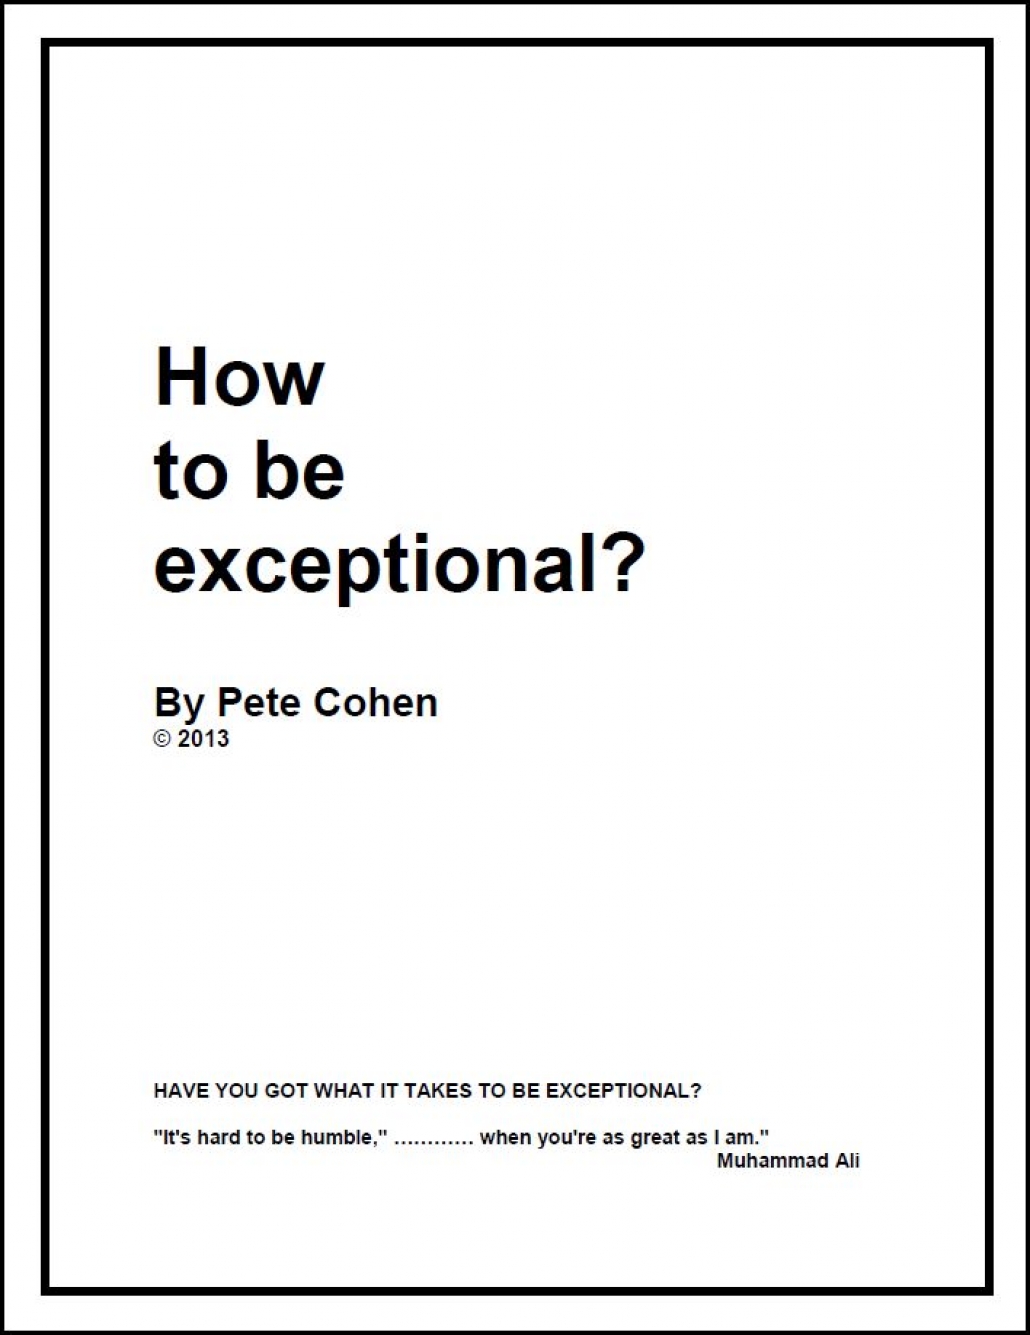 How to be exceptional?